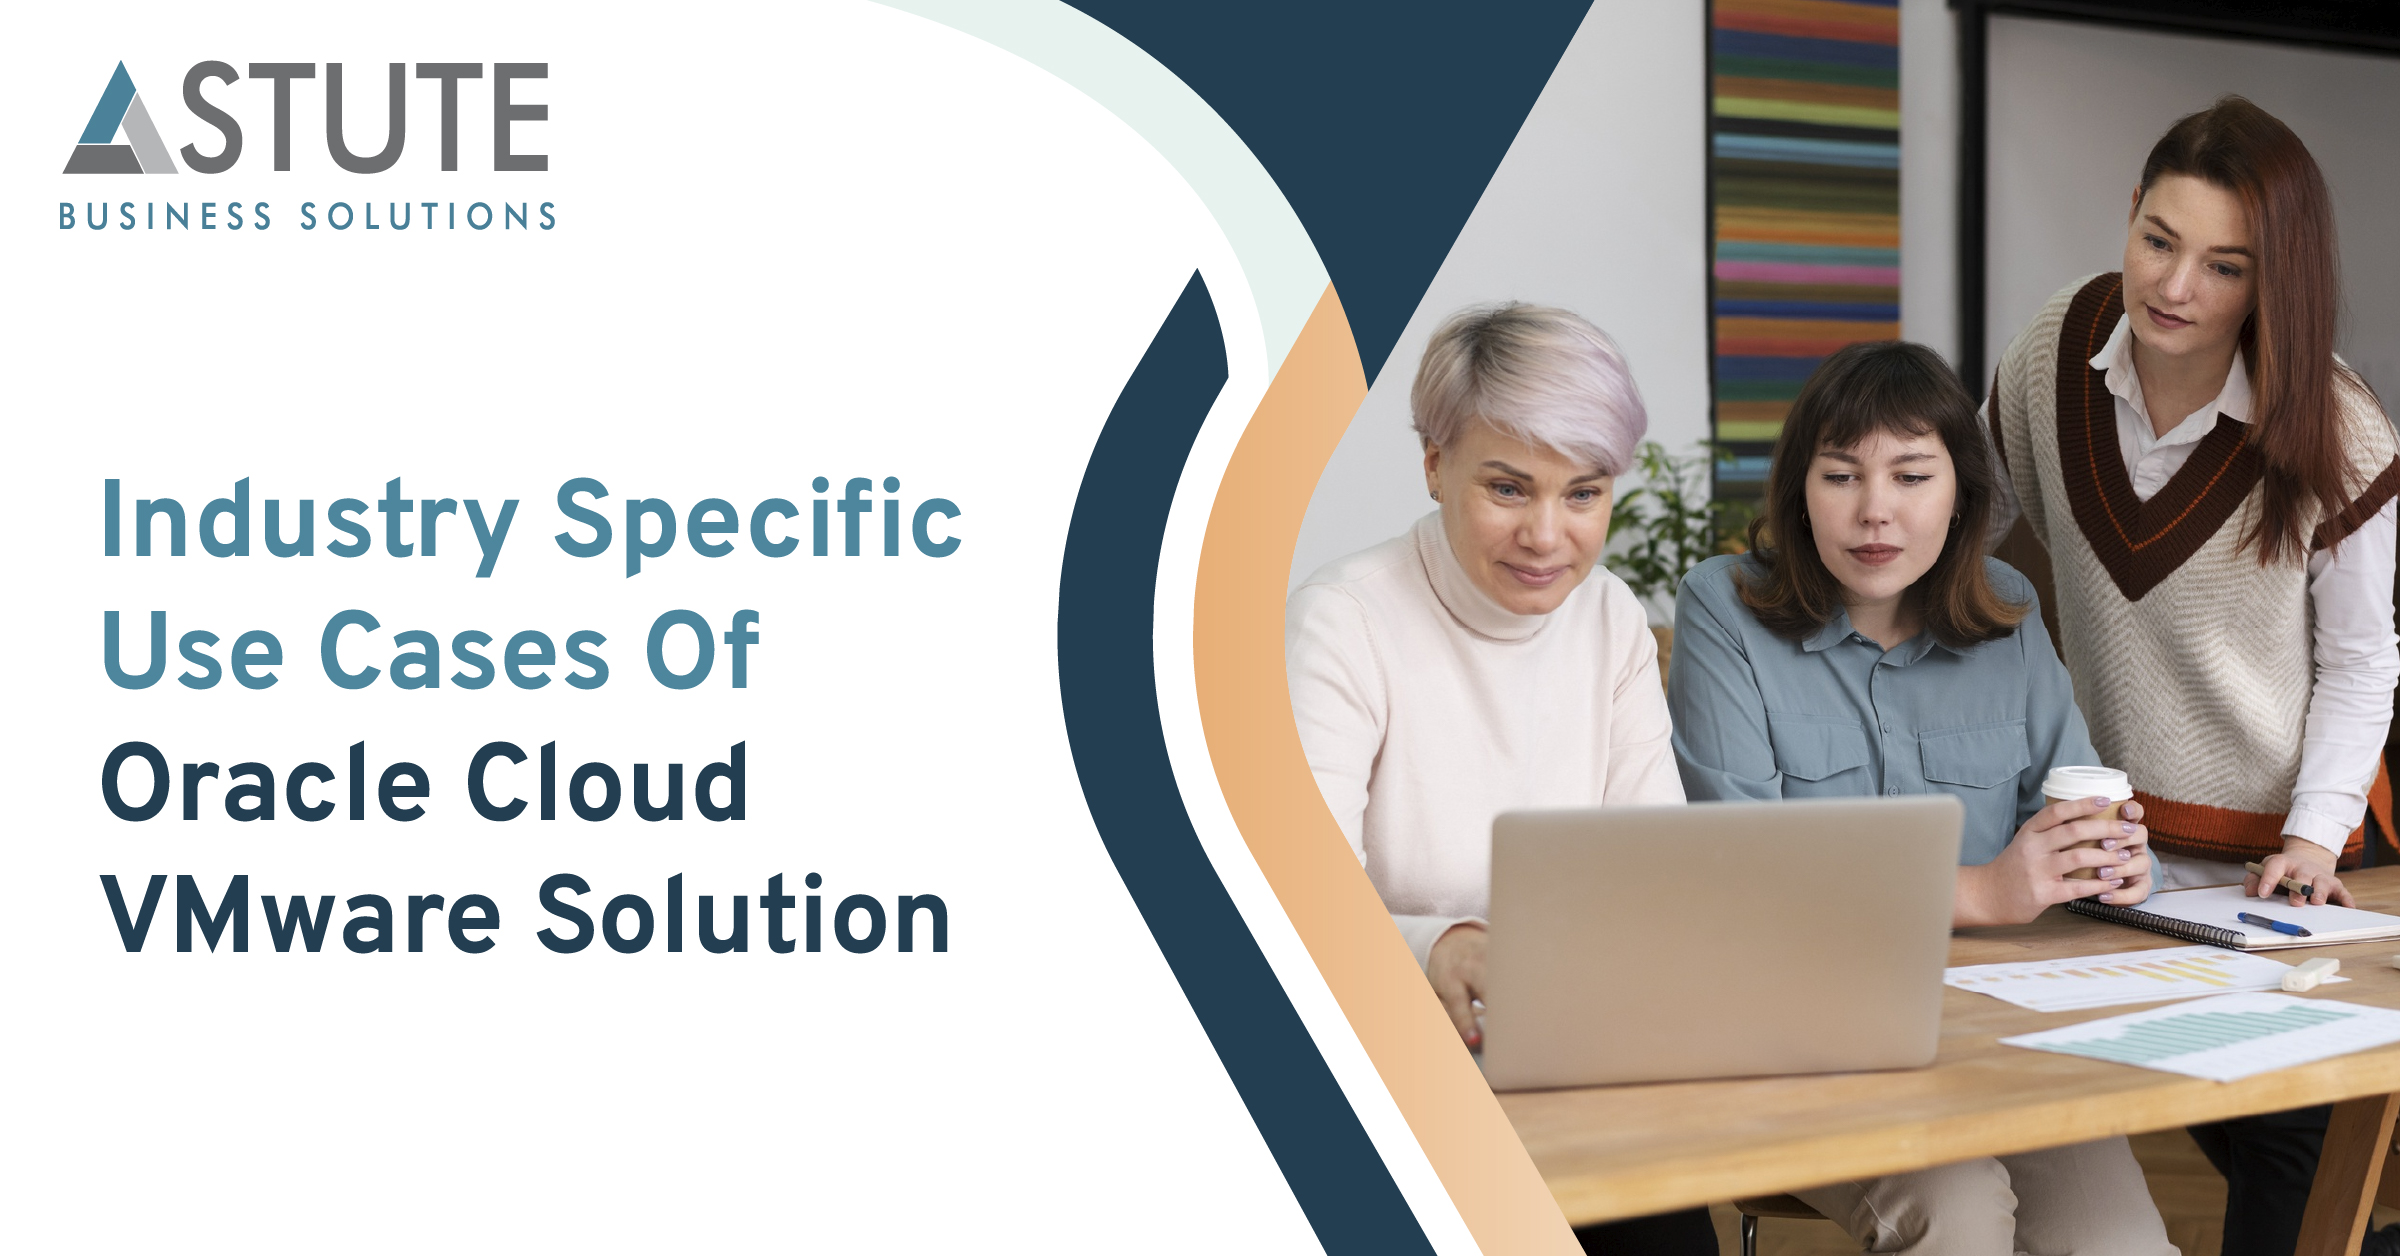 Industry Specific Use Cases Of Oracle Cloud VMware Solution